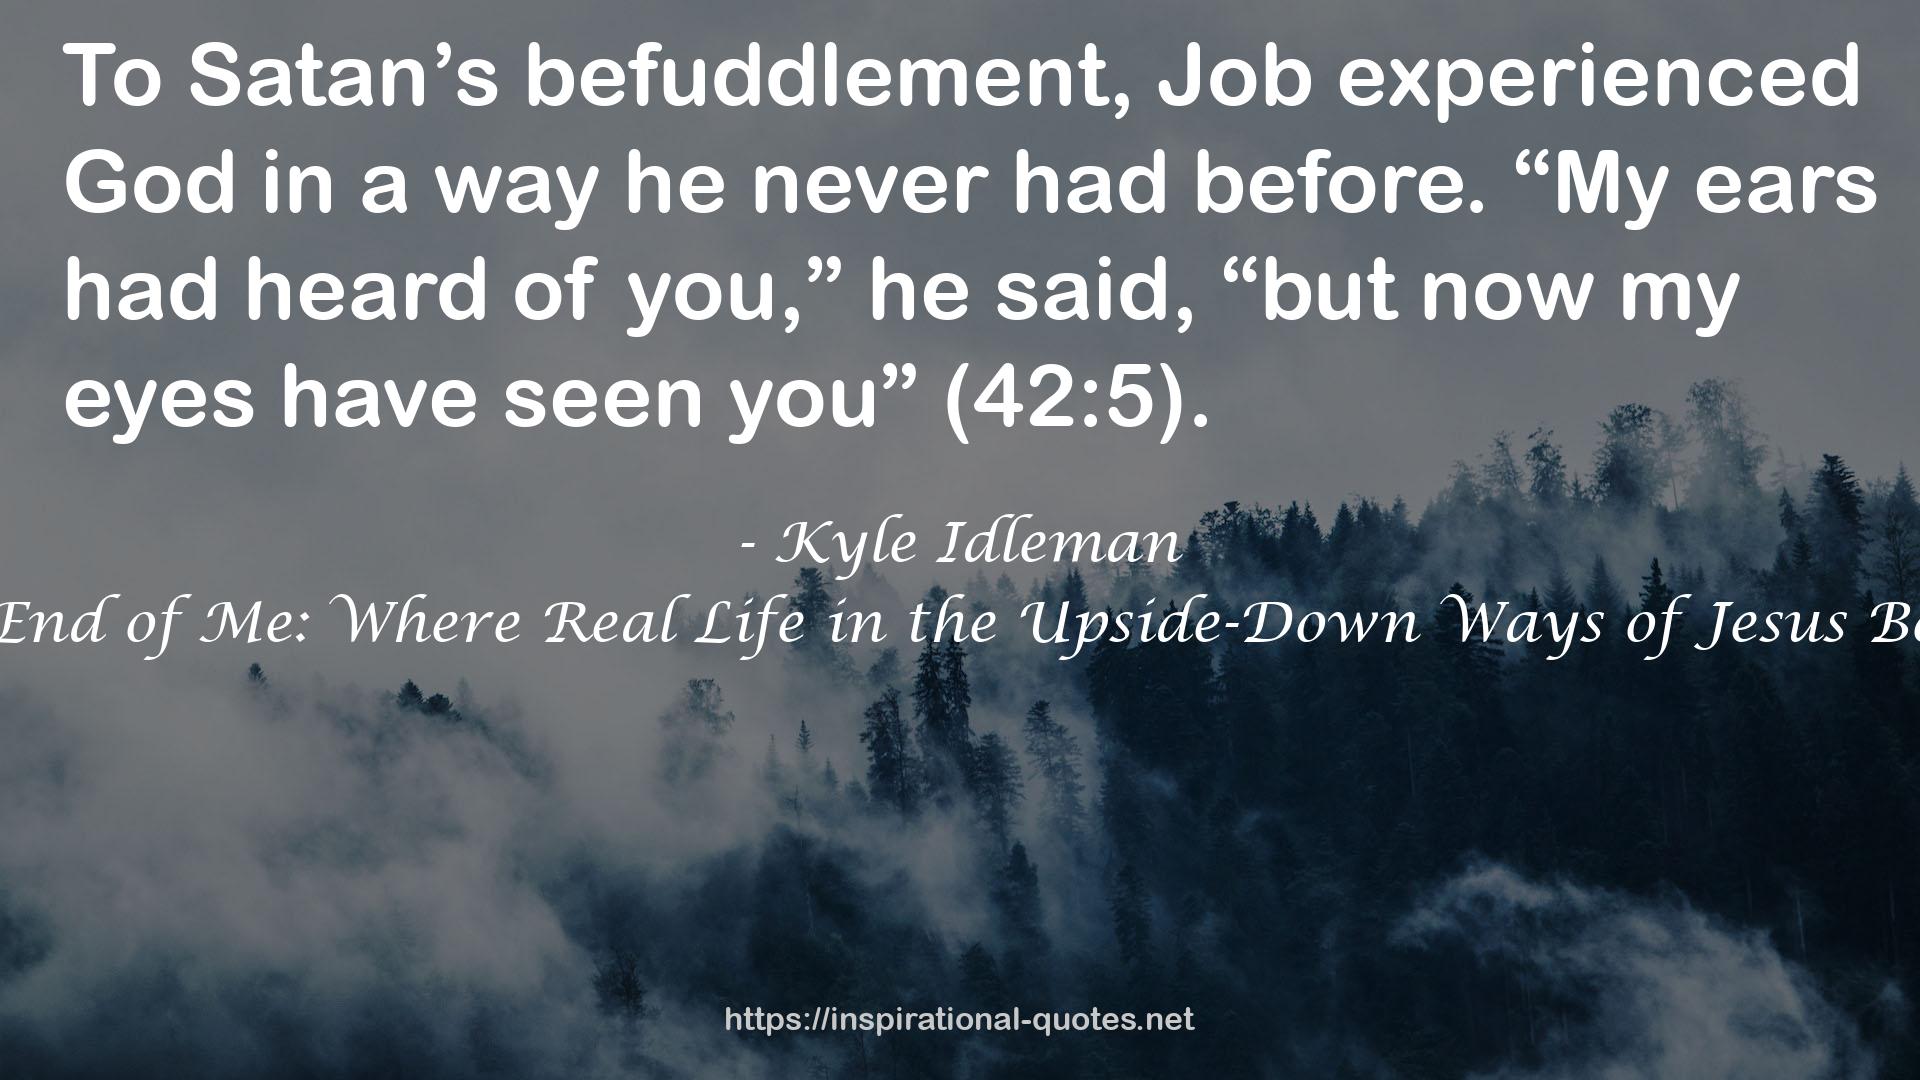 Kyle Idleman QUOTES